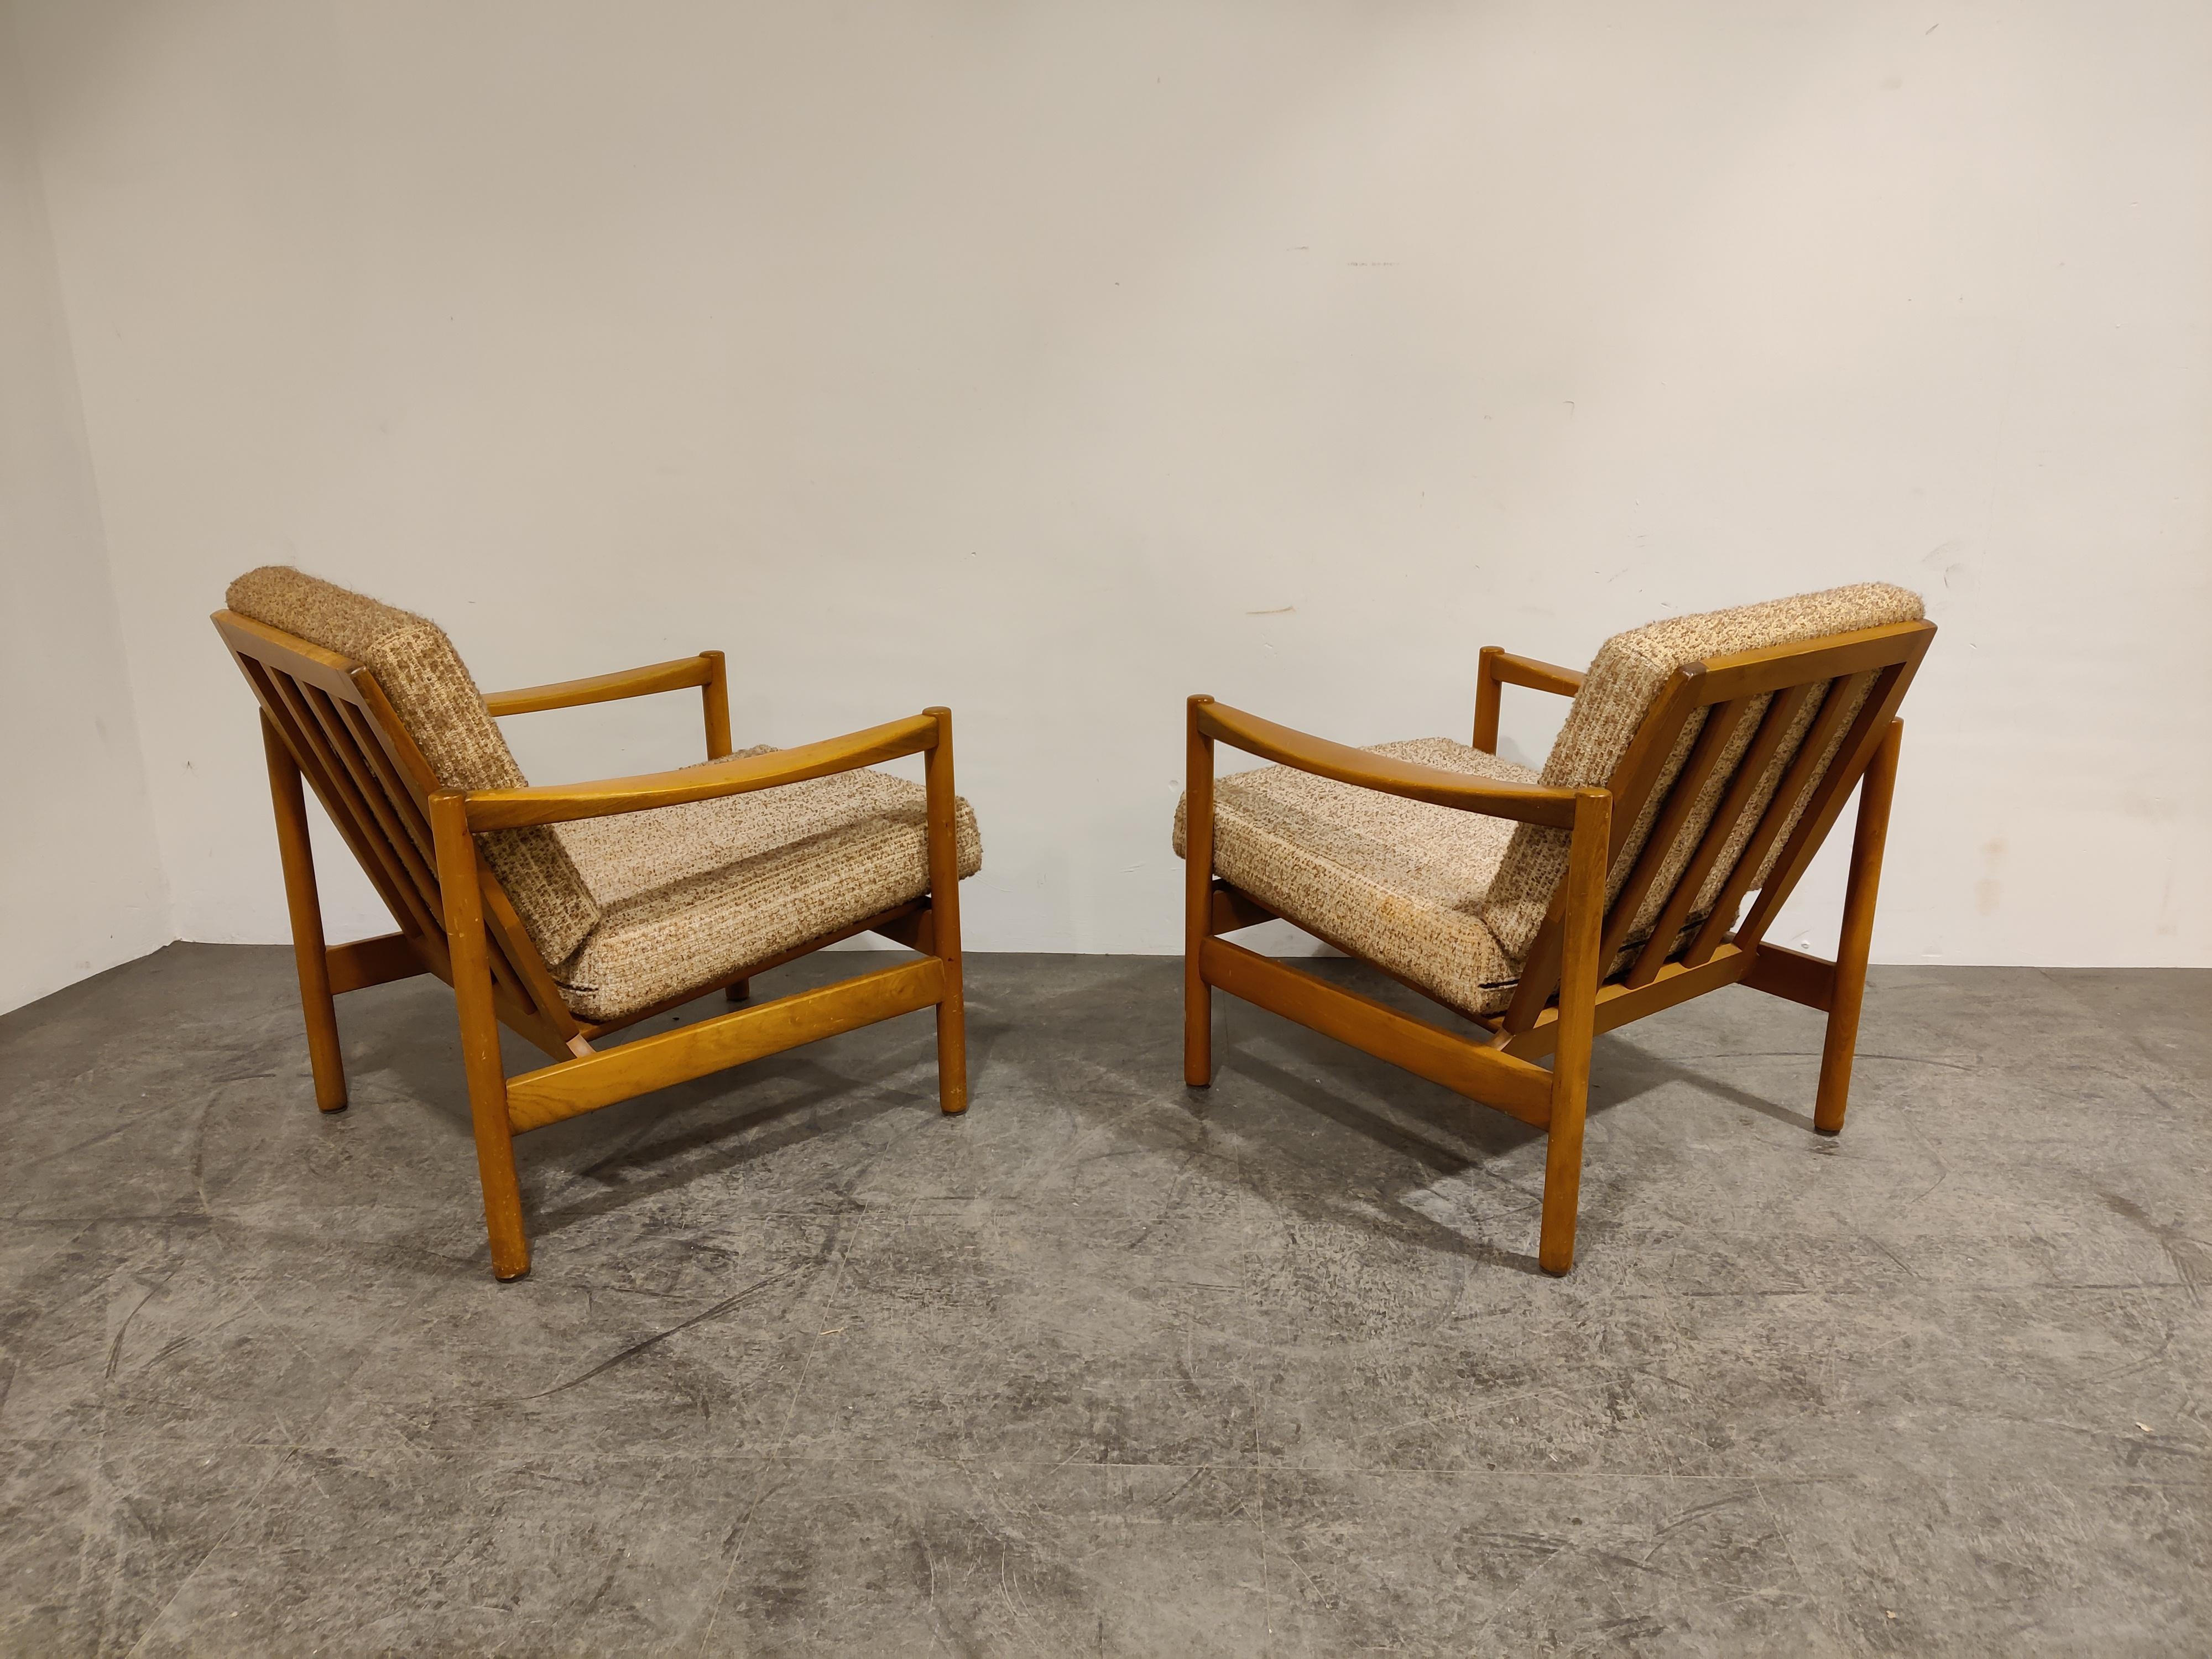 These elegant armchair by Knoll Antimott.

Beautifully crafted beech wooden frames with the original fabric cushions.

Condition: frames are in original conditionwith normal wear, sturdy. - Fabric is also original and has some stains. But still